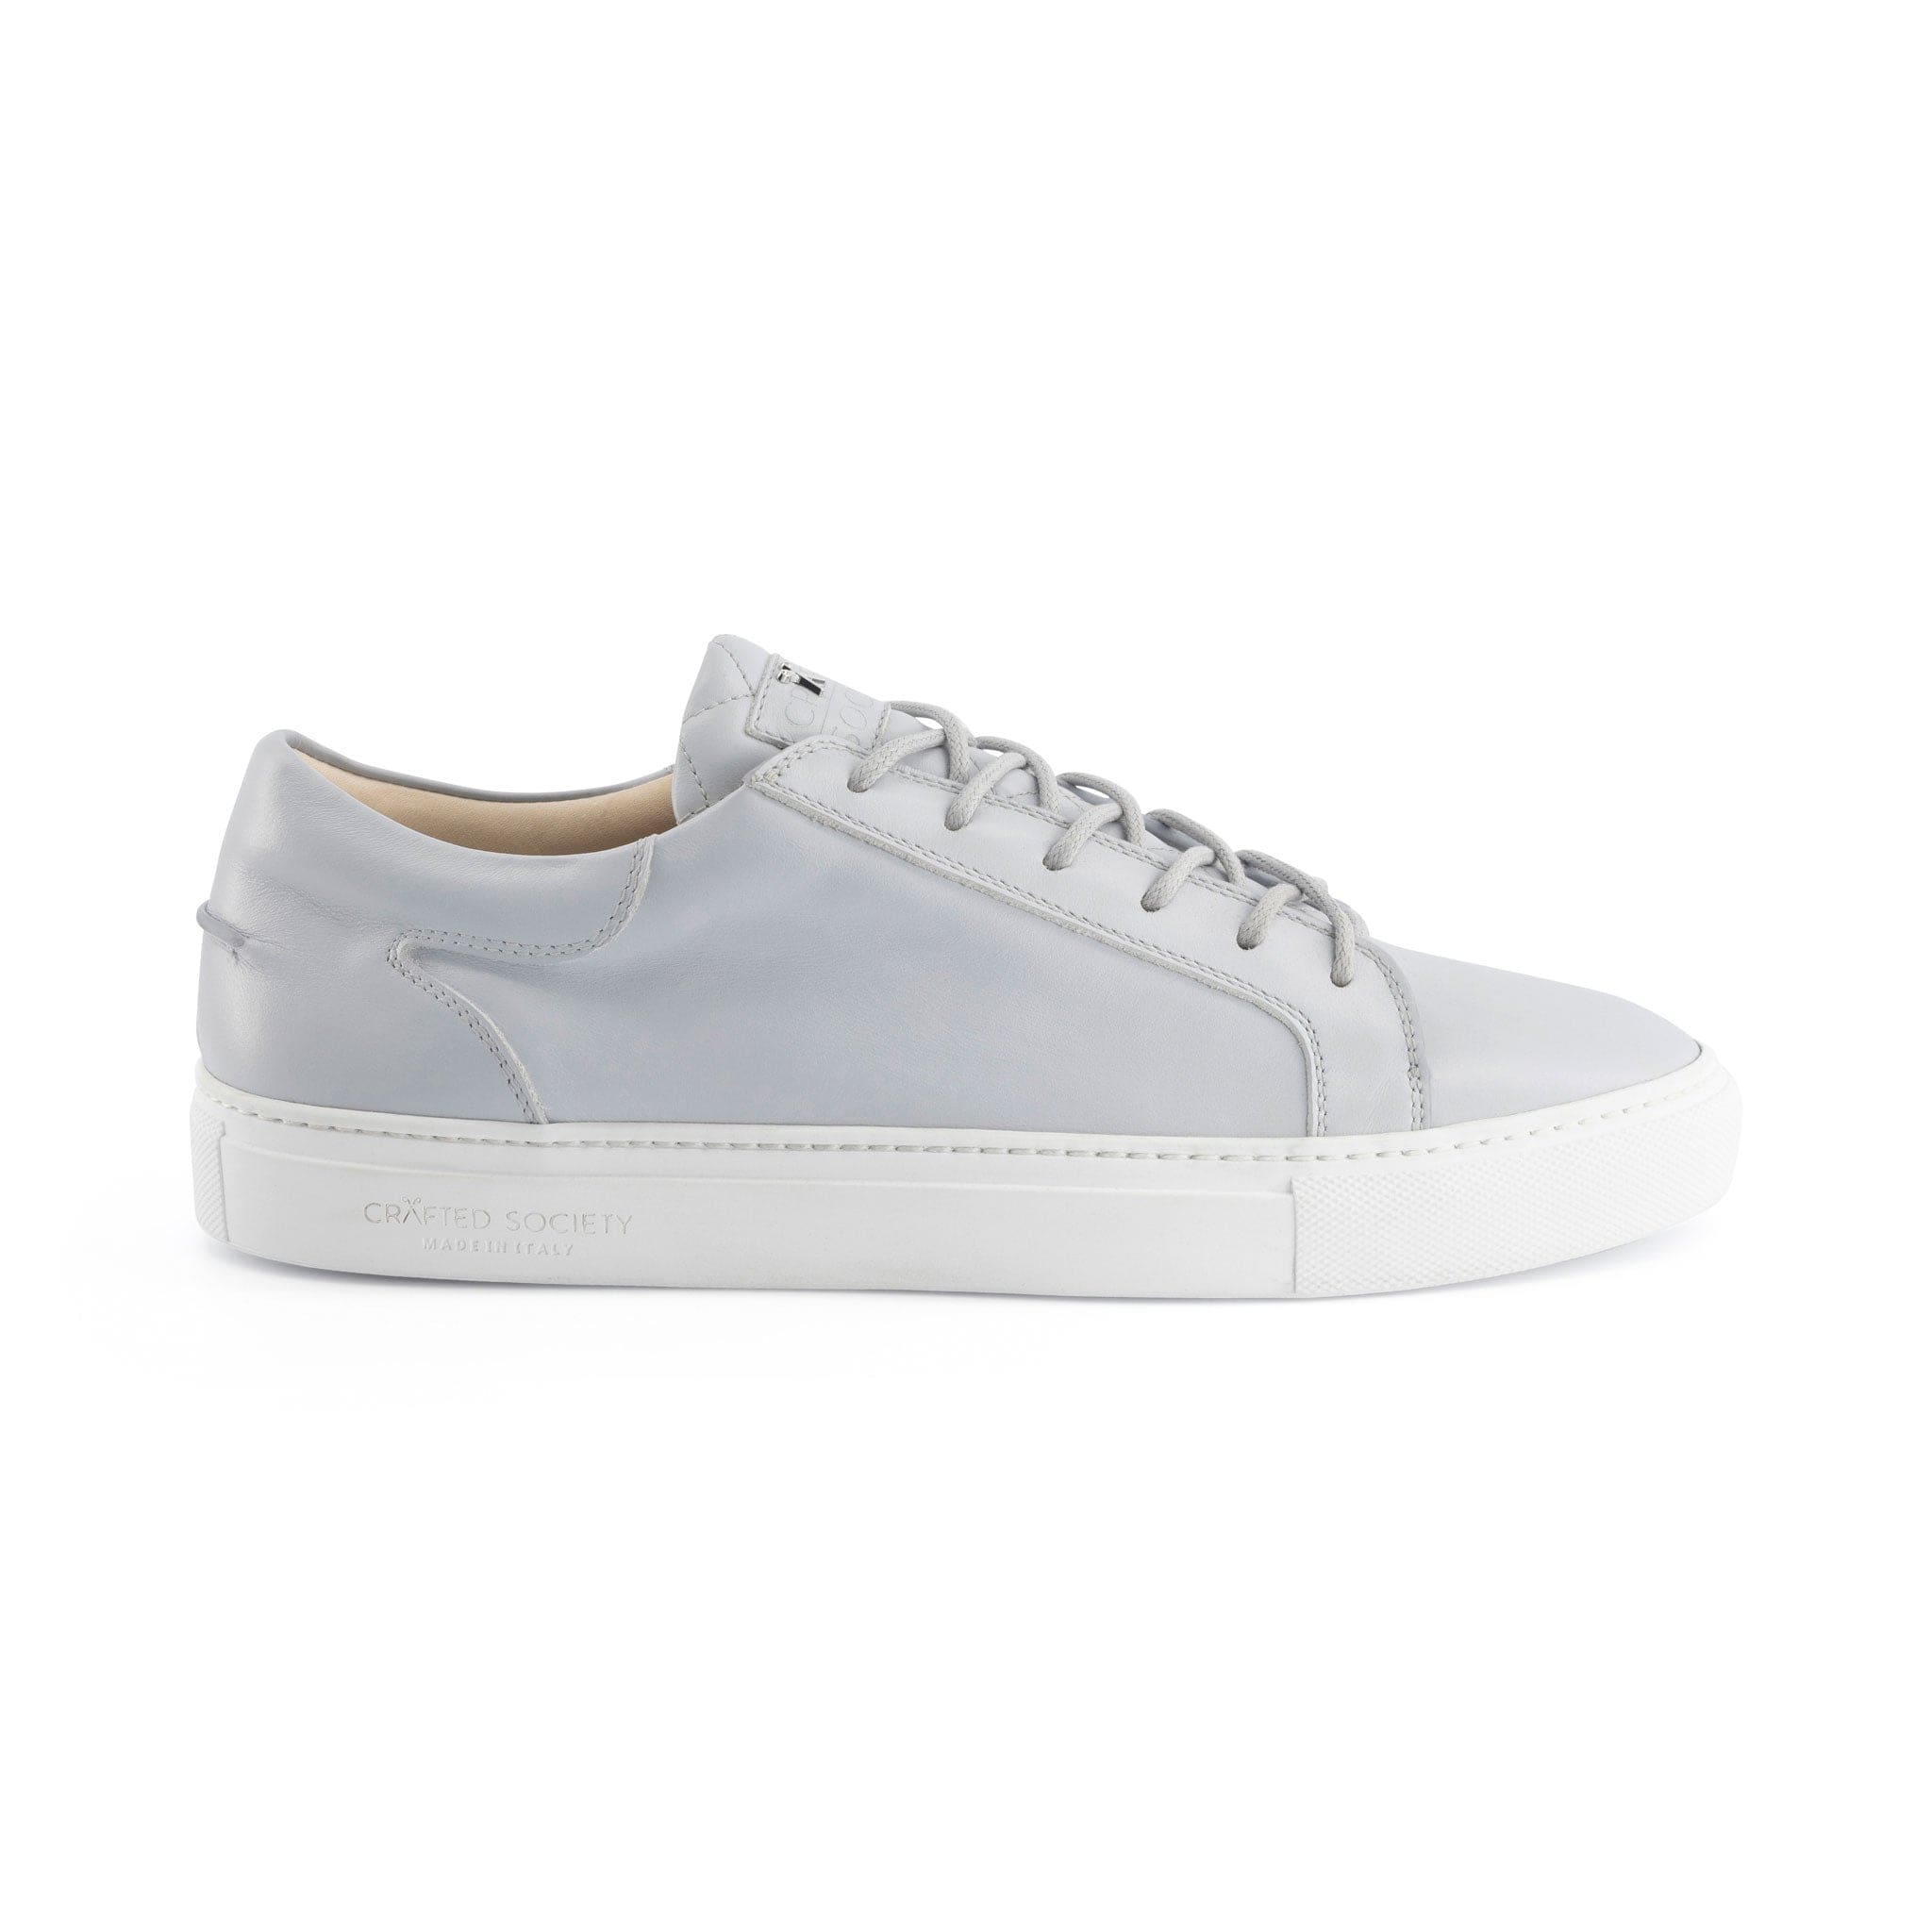 Italian leather sneaker in pearl grey top grain leather with white outsole